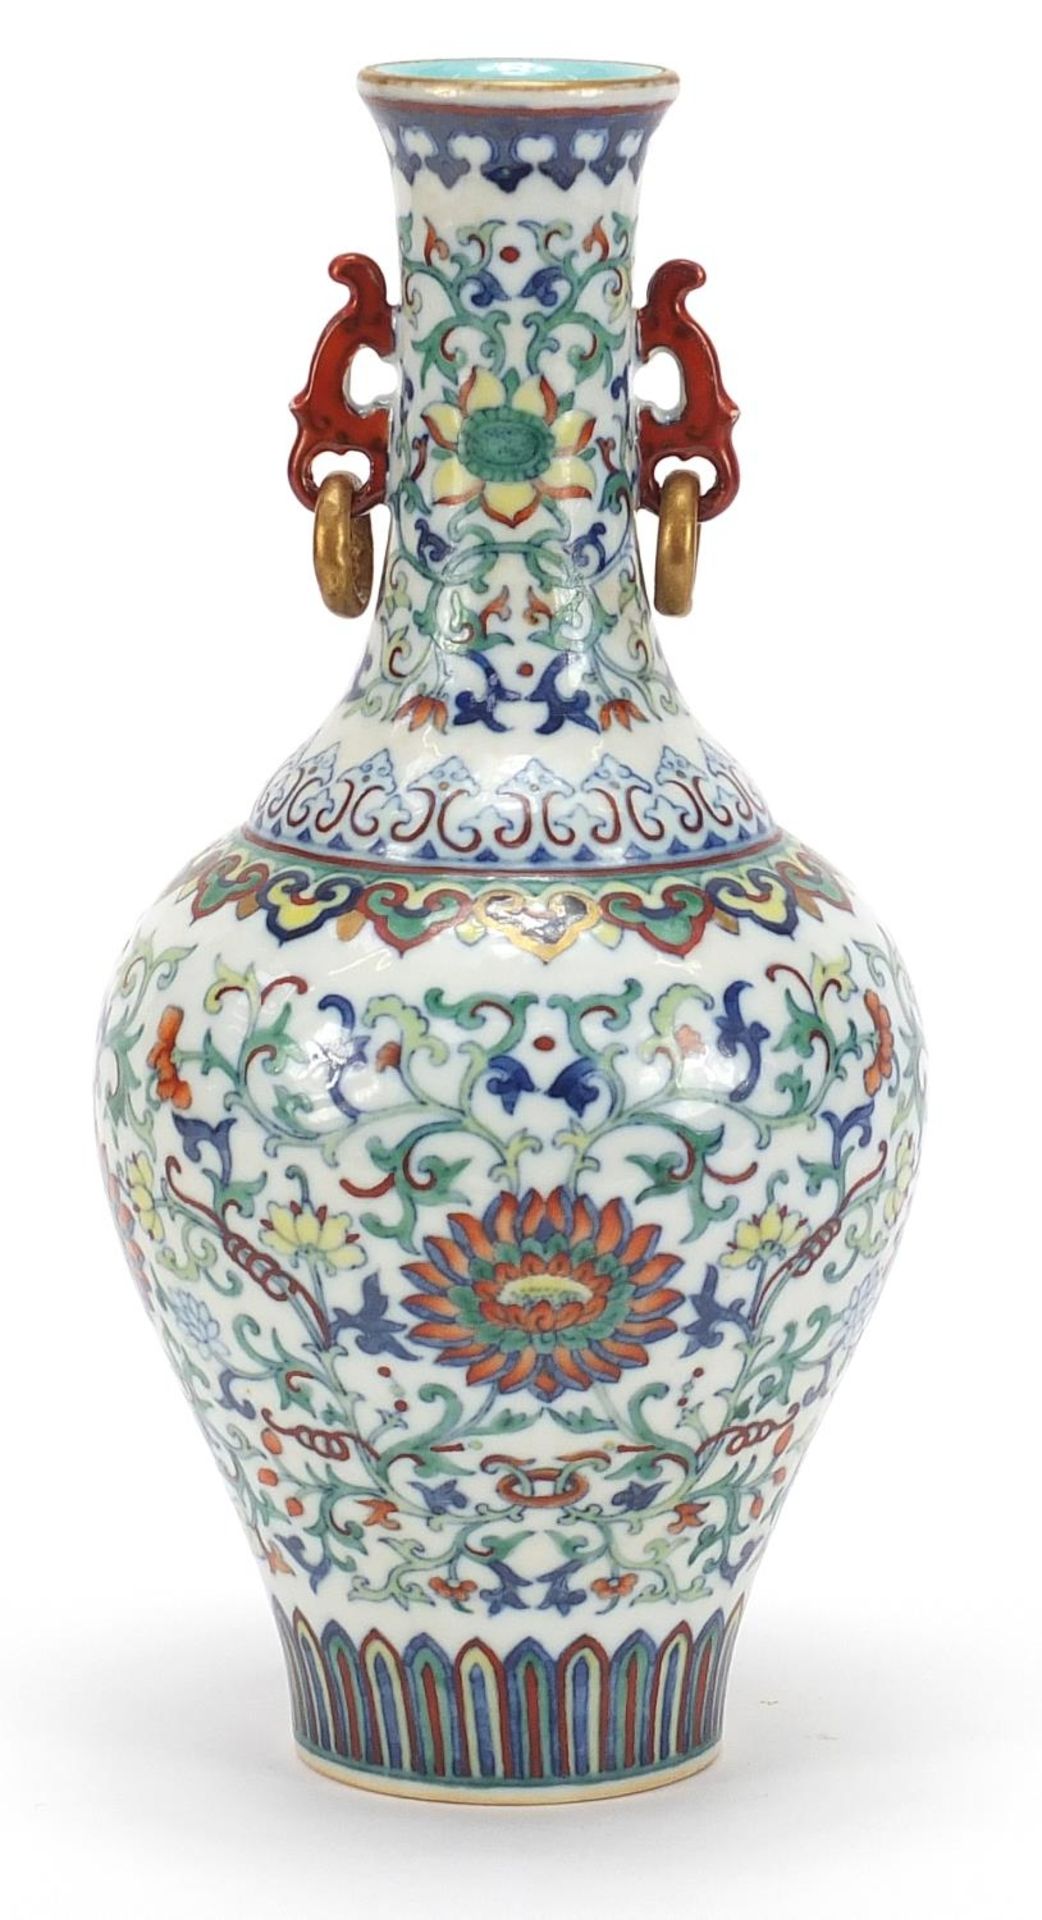 Good Chinese doucai porcelain vase with iron red ring turned handles, finely hand painted with